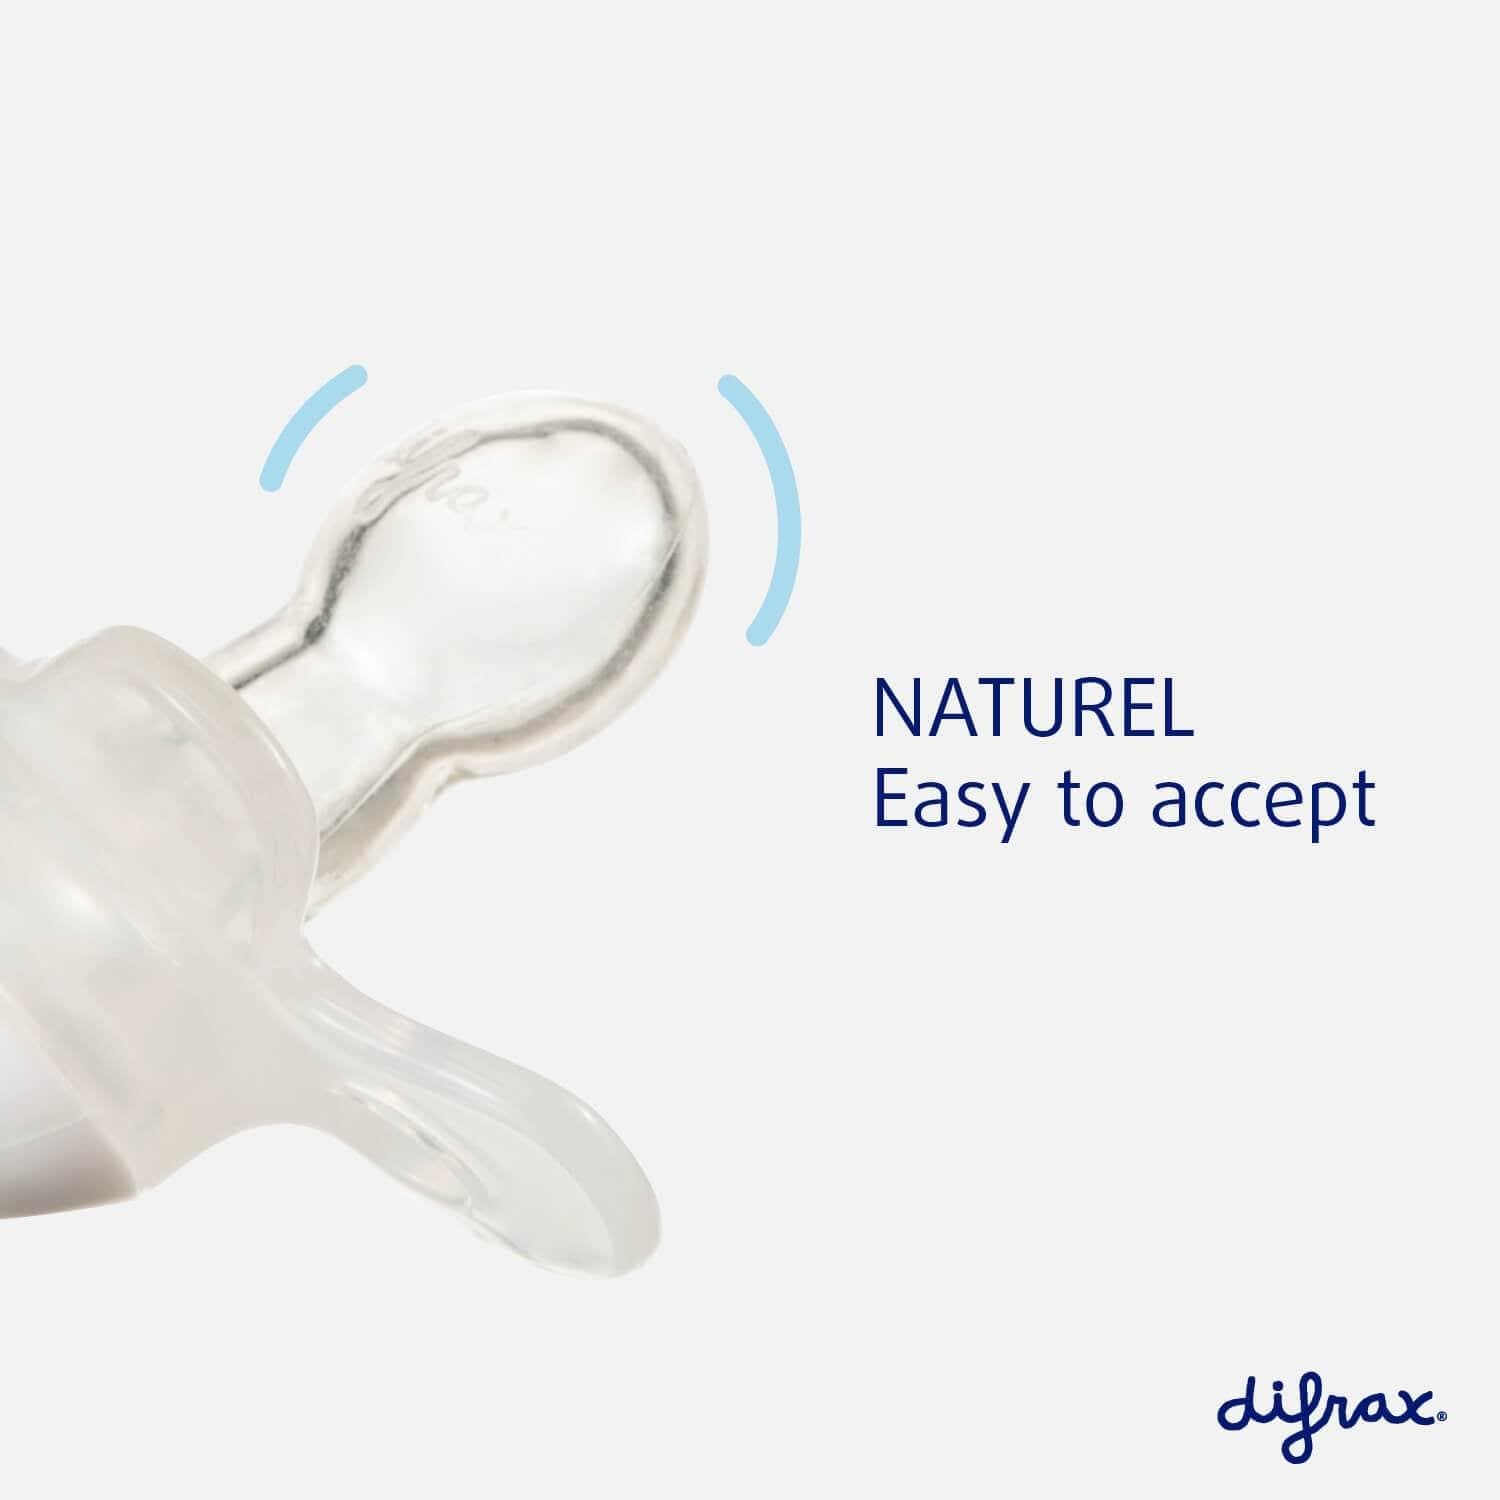 Difrax sucette natural 6+ m - Pharma-Welcome